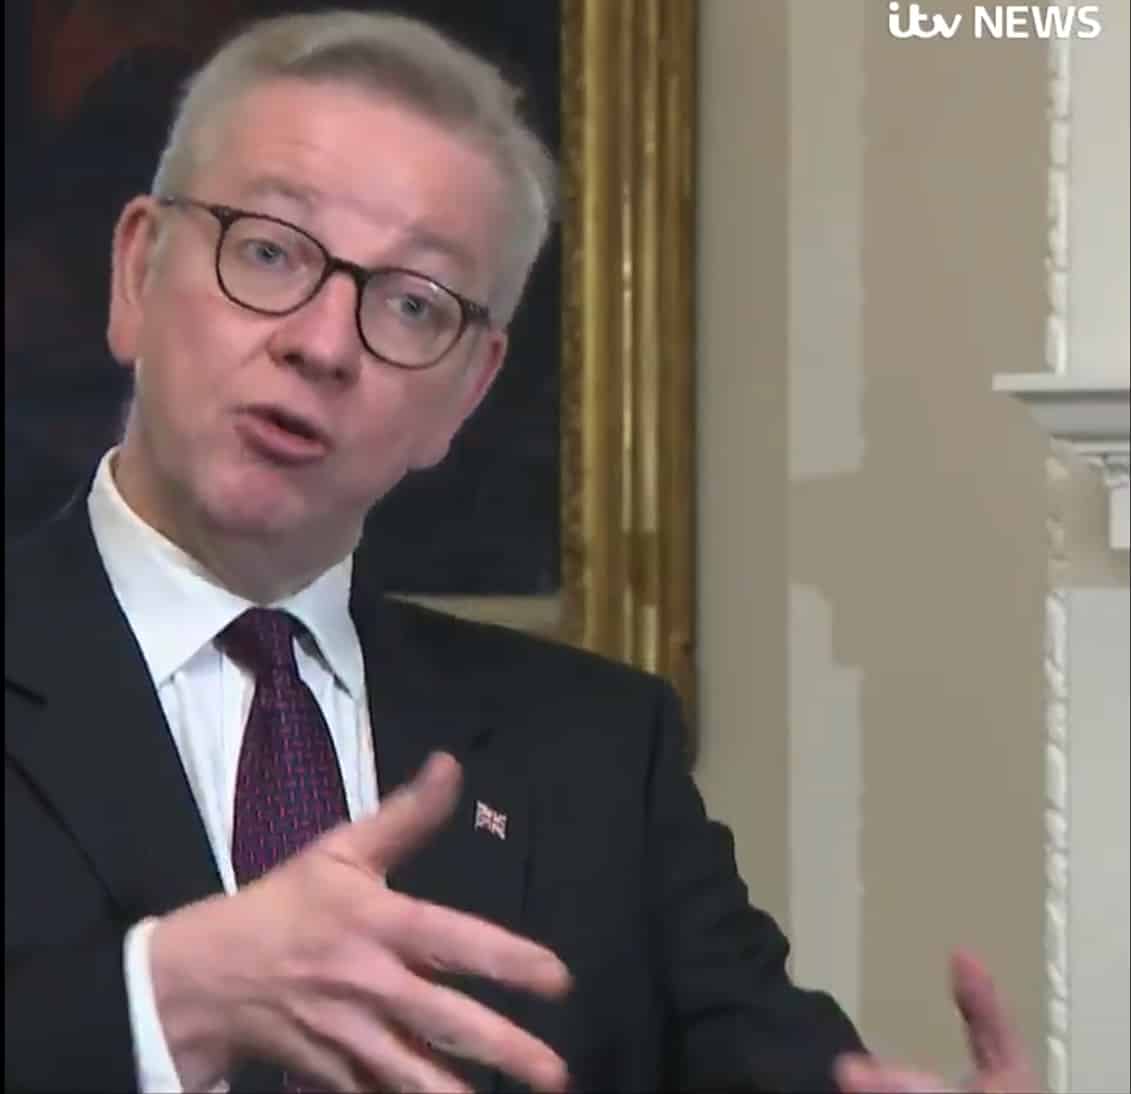 Michael Gove accidentally extolls the virtues of remaining in the EU in “best of both worlds” speech